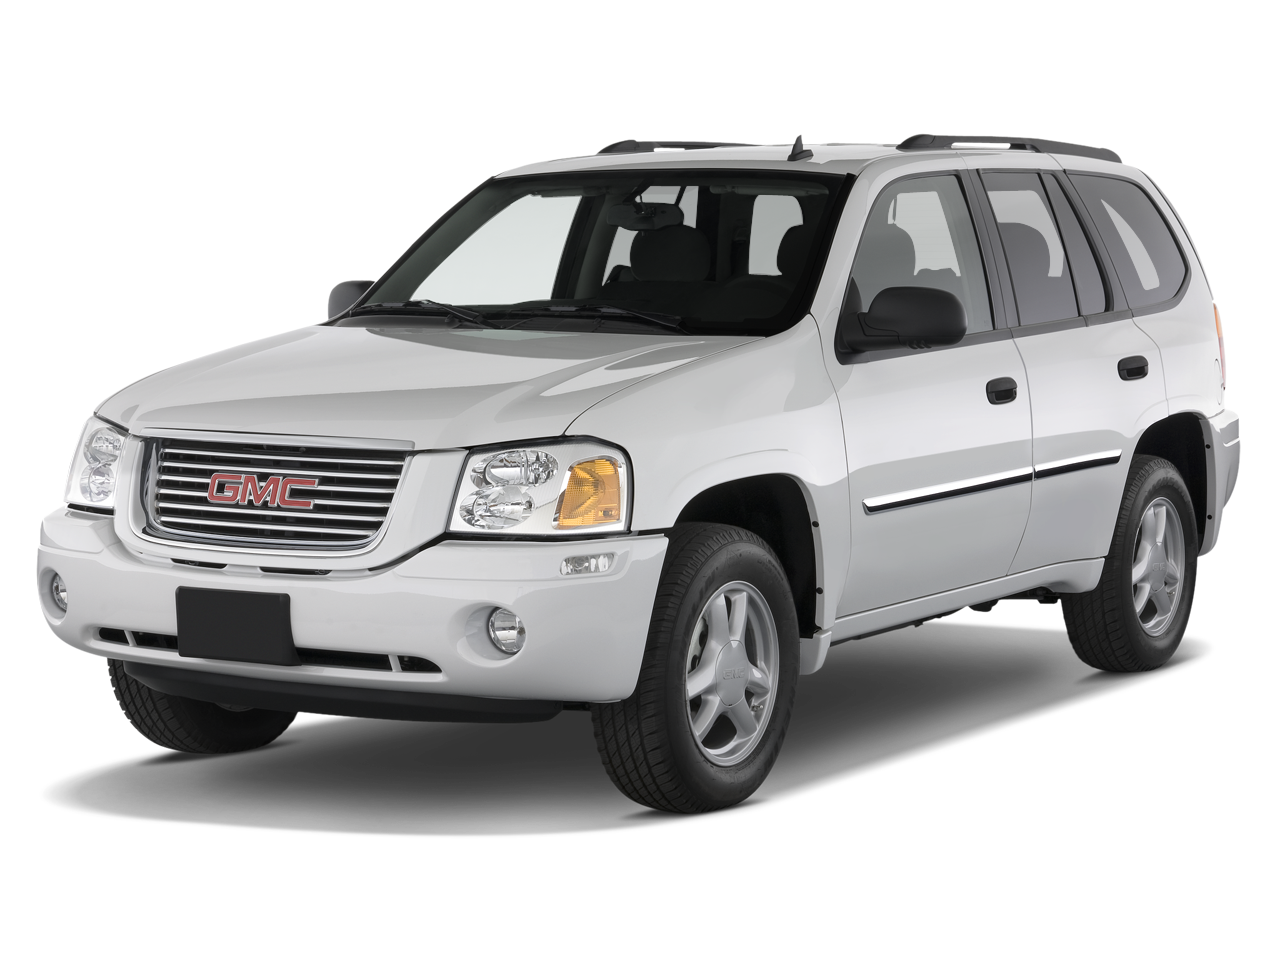 2009 GMC Envoy Prices, Reviews, and Photos - MotorTrend